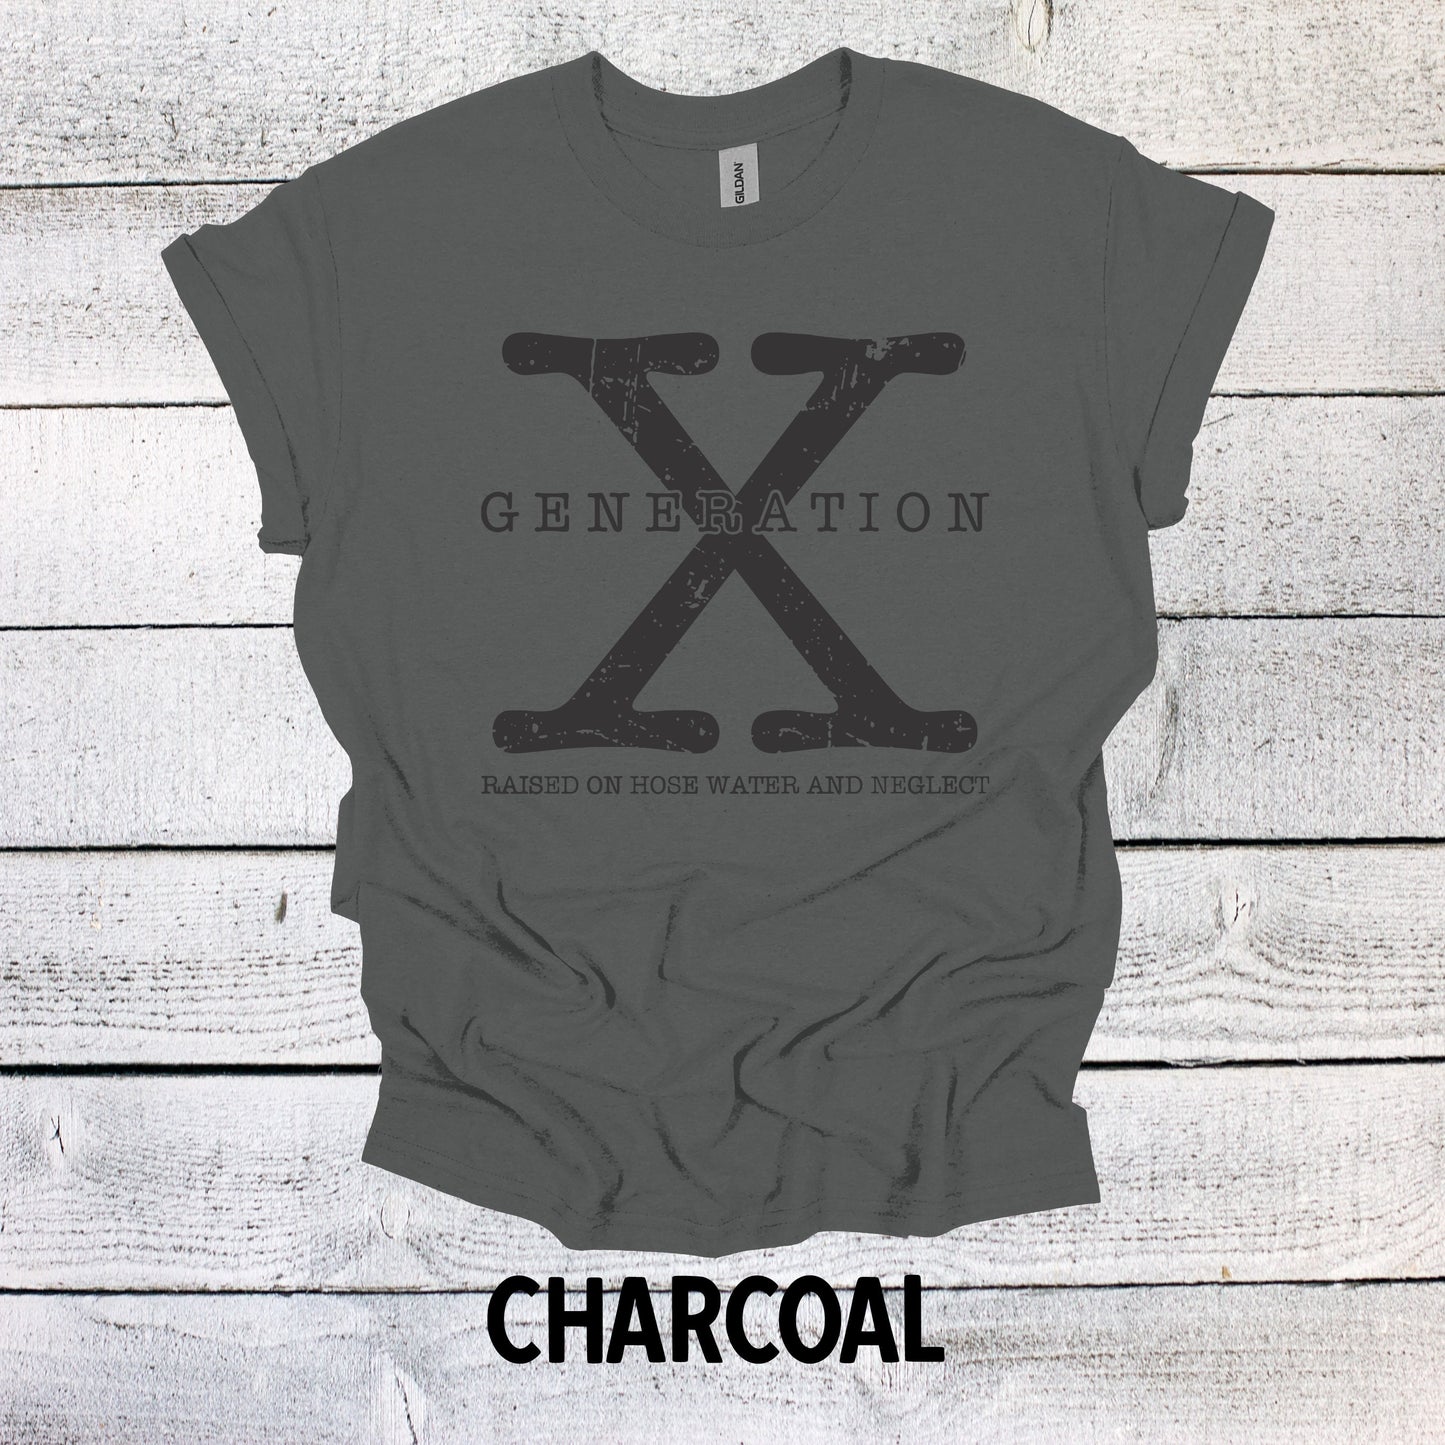 Generation X Shirt NO DATES Unisex Shirt Gen X T-Shirt Generation X T-Shirt Generation X T-Shirt Raised on Hose Water and Neglect